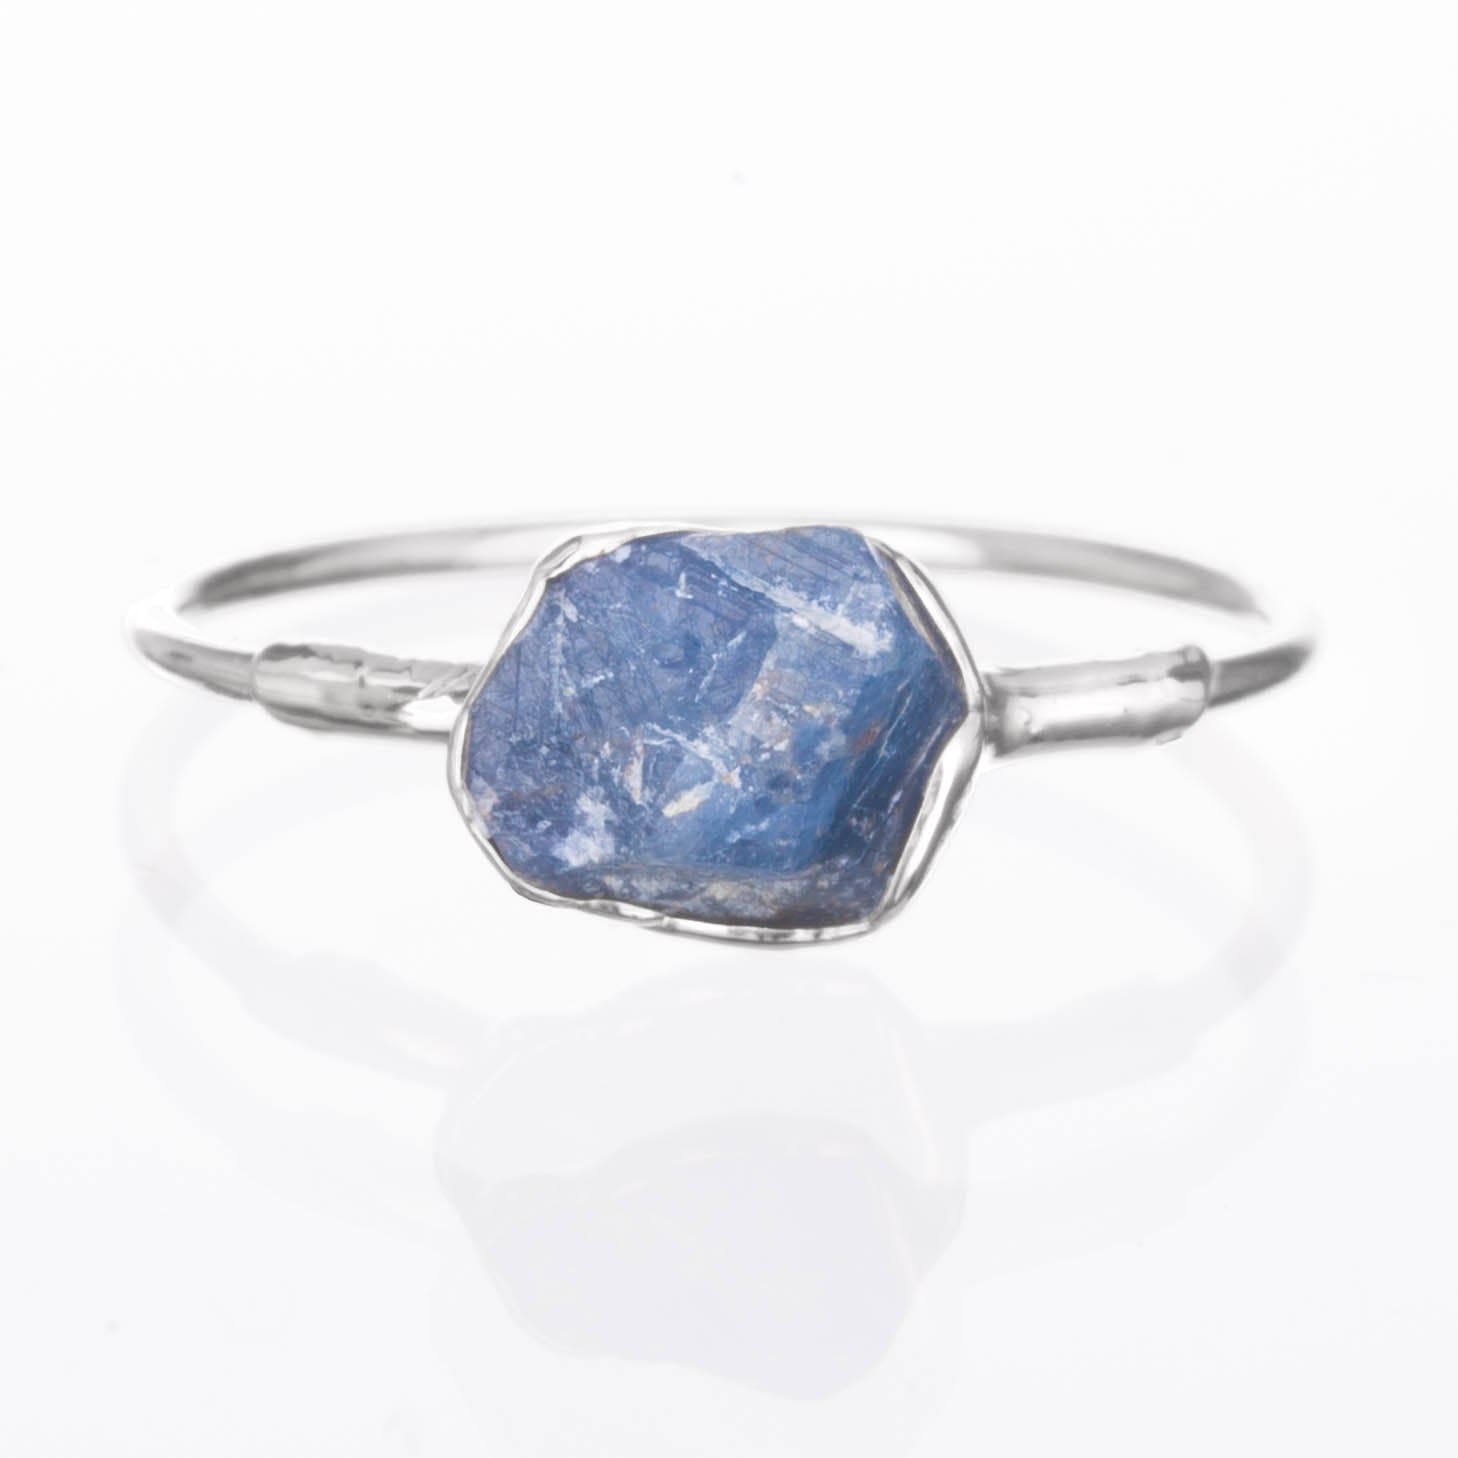 Raw Sapphire Ring in Sterling Silver Gemstone Jewelry Rough